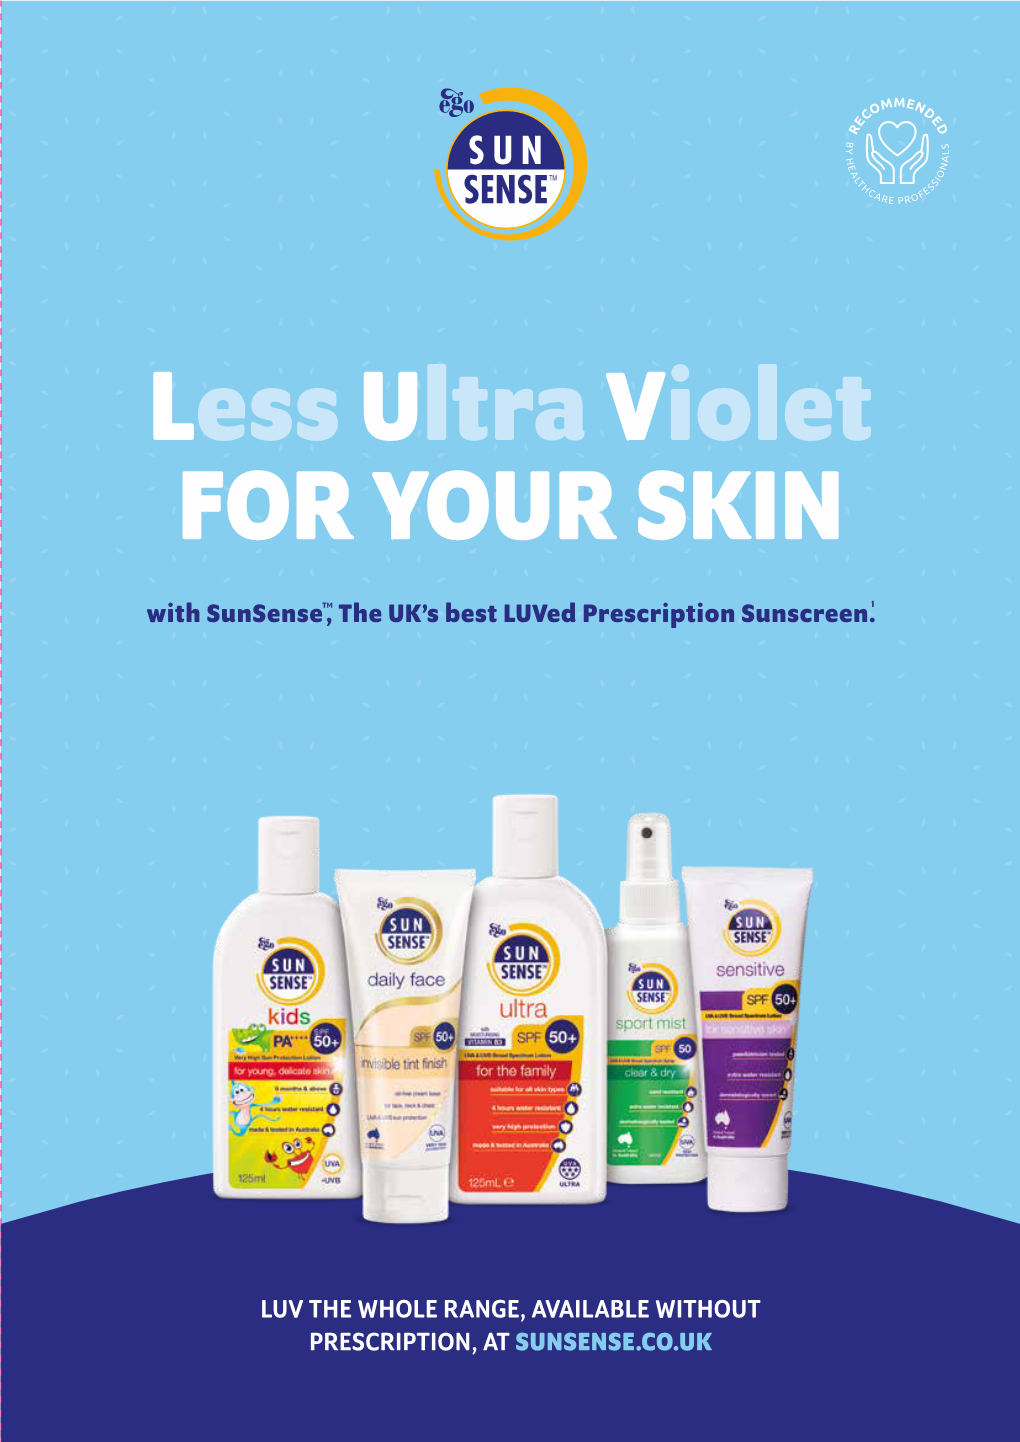 Lessultraviolet for YOUR SKIN